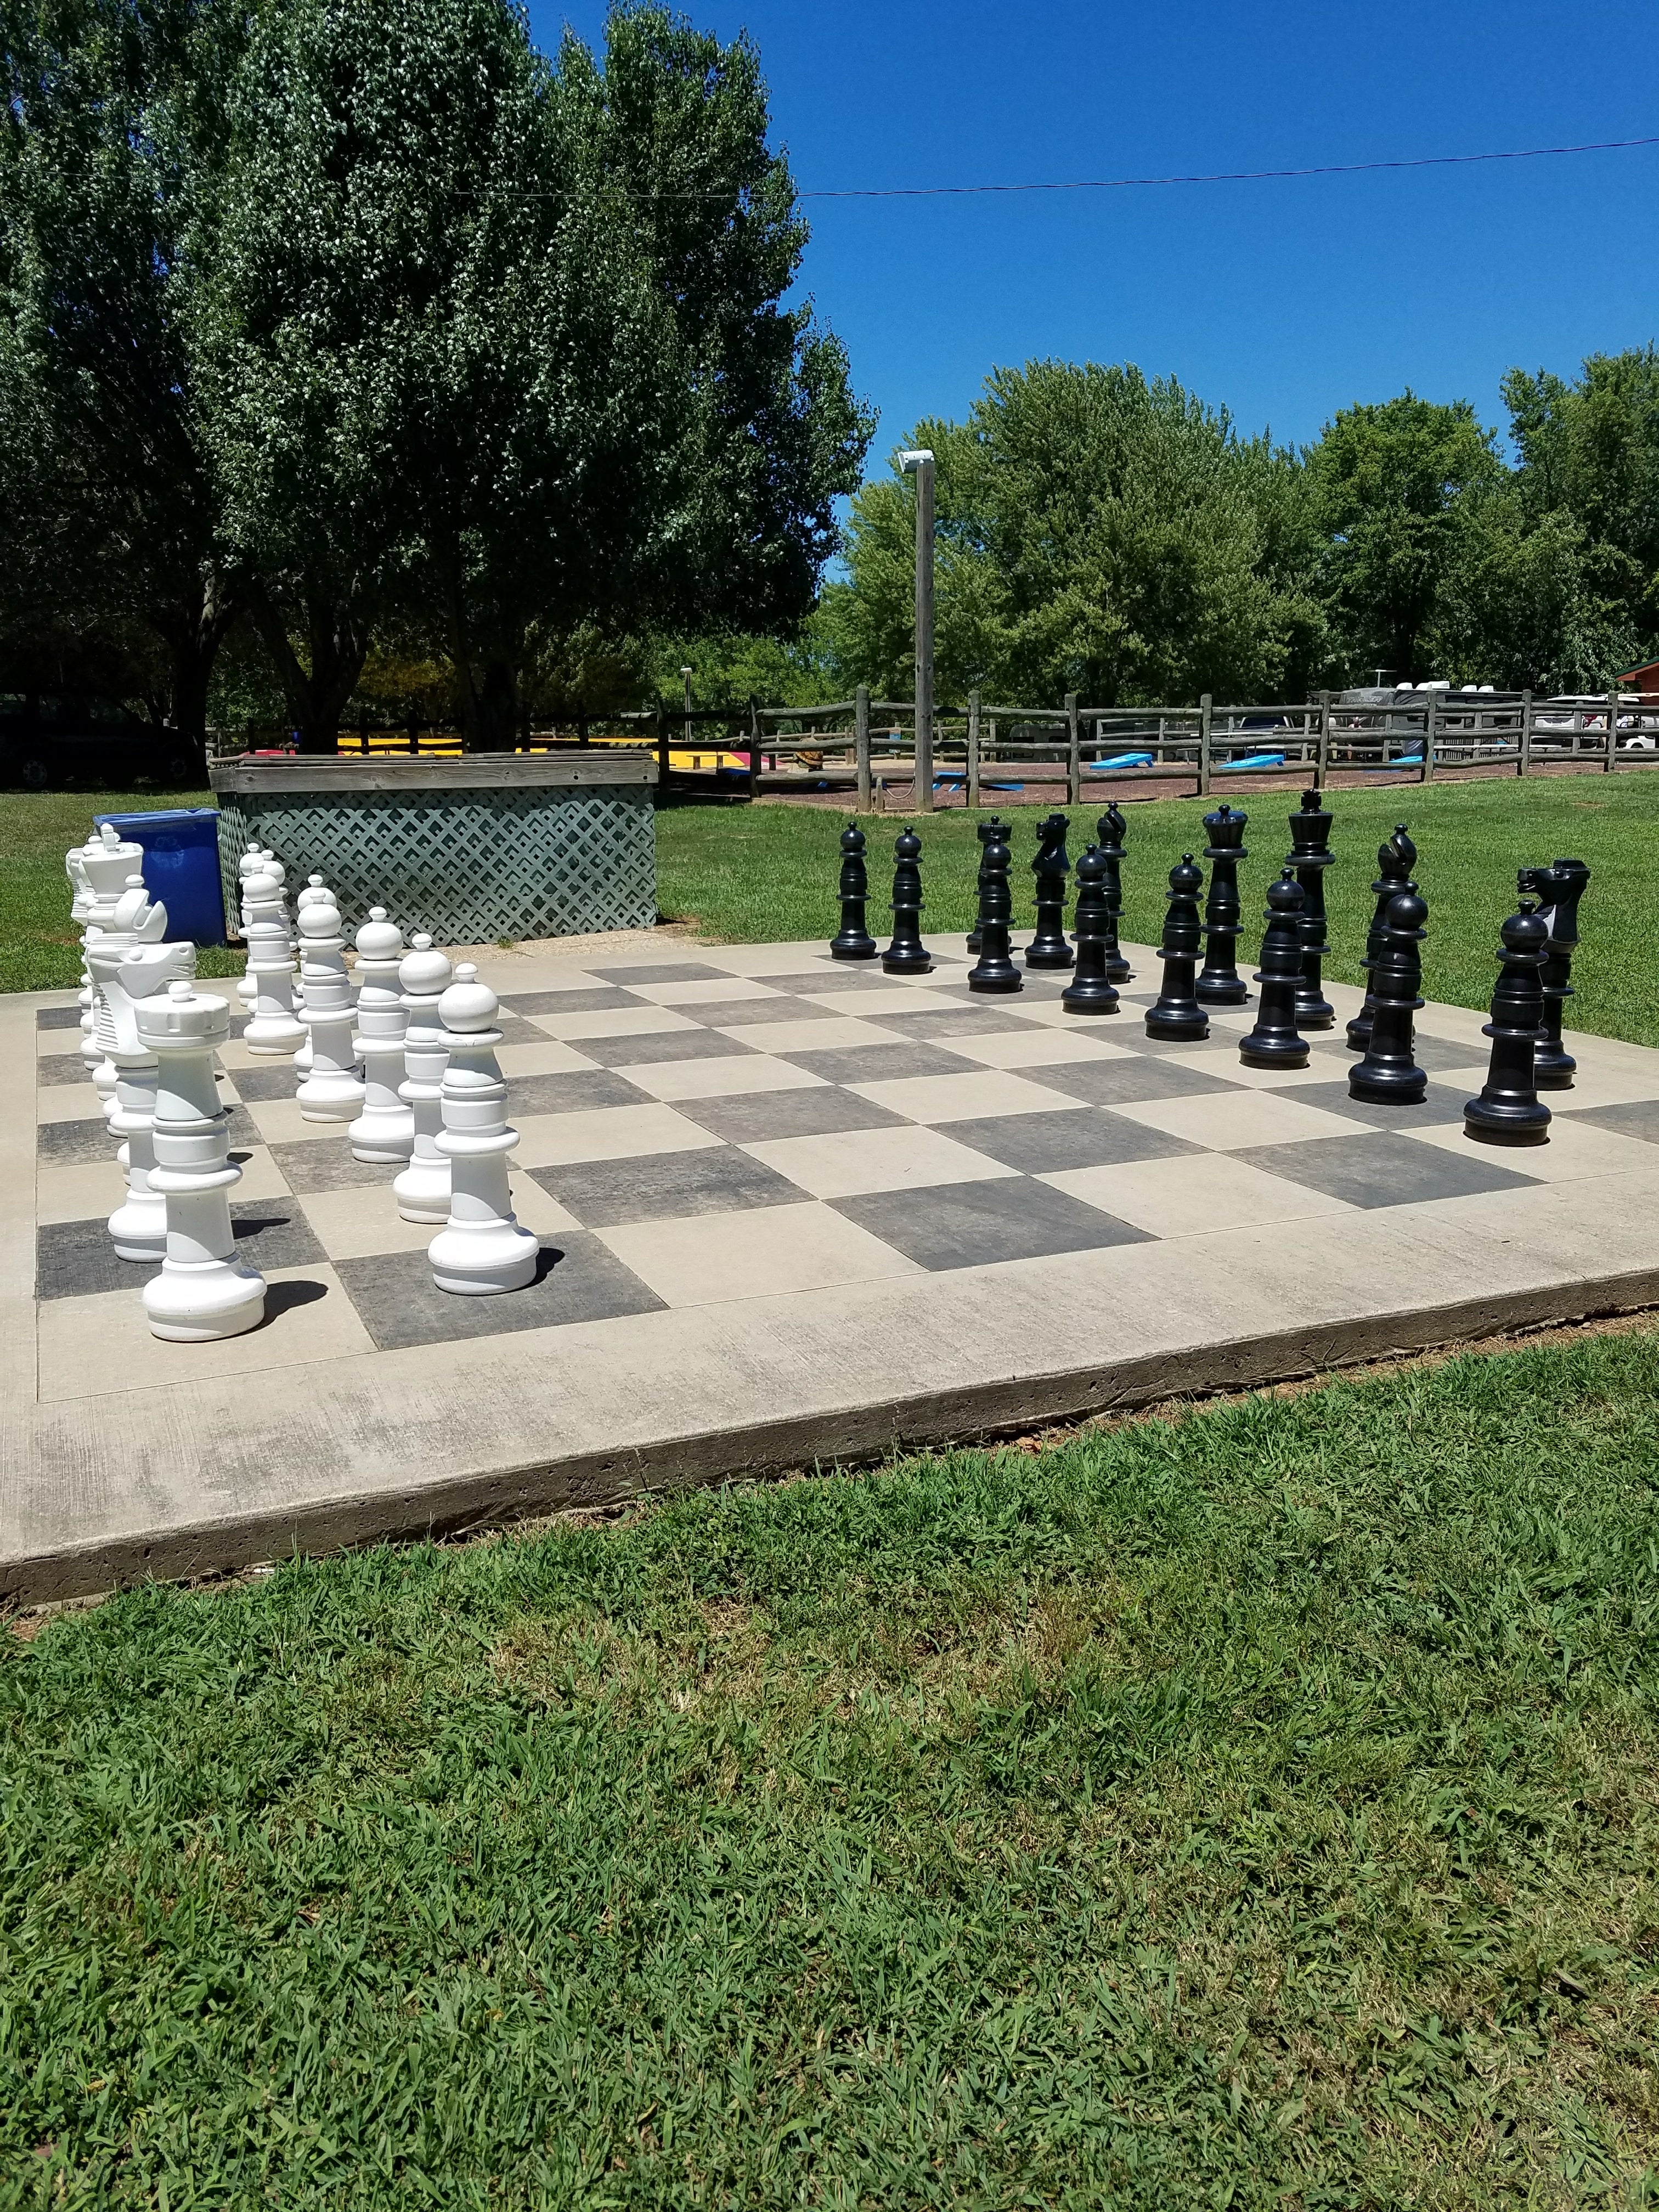 Life size chess game!